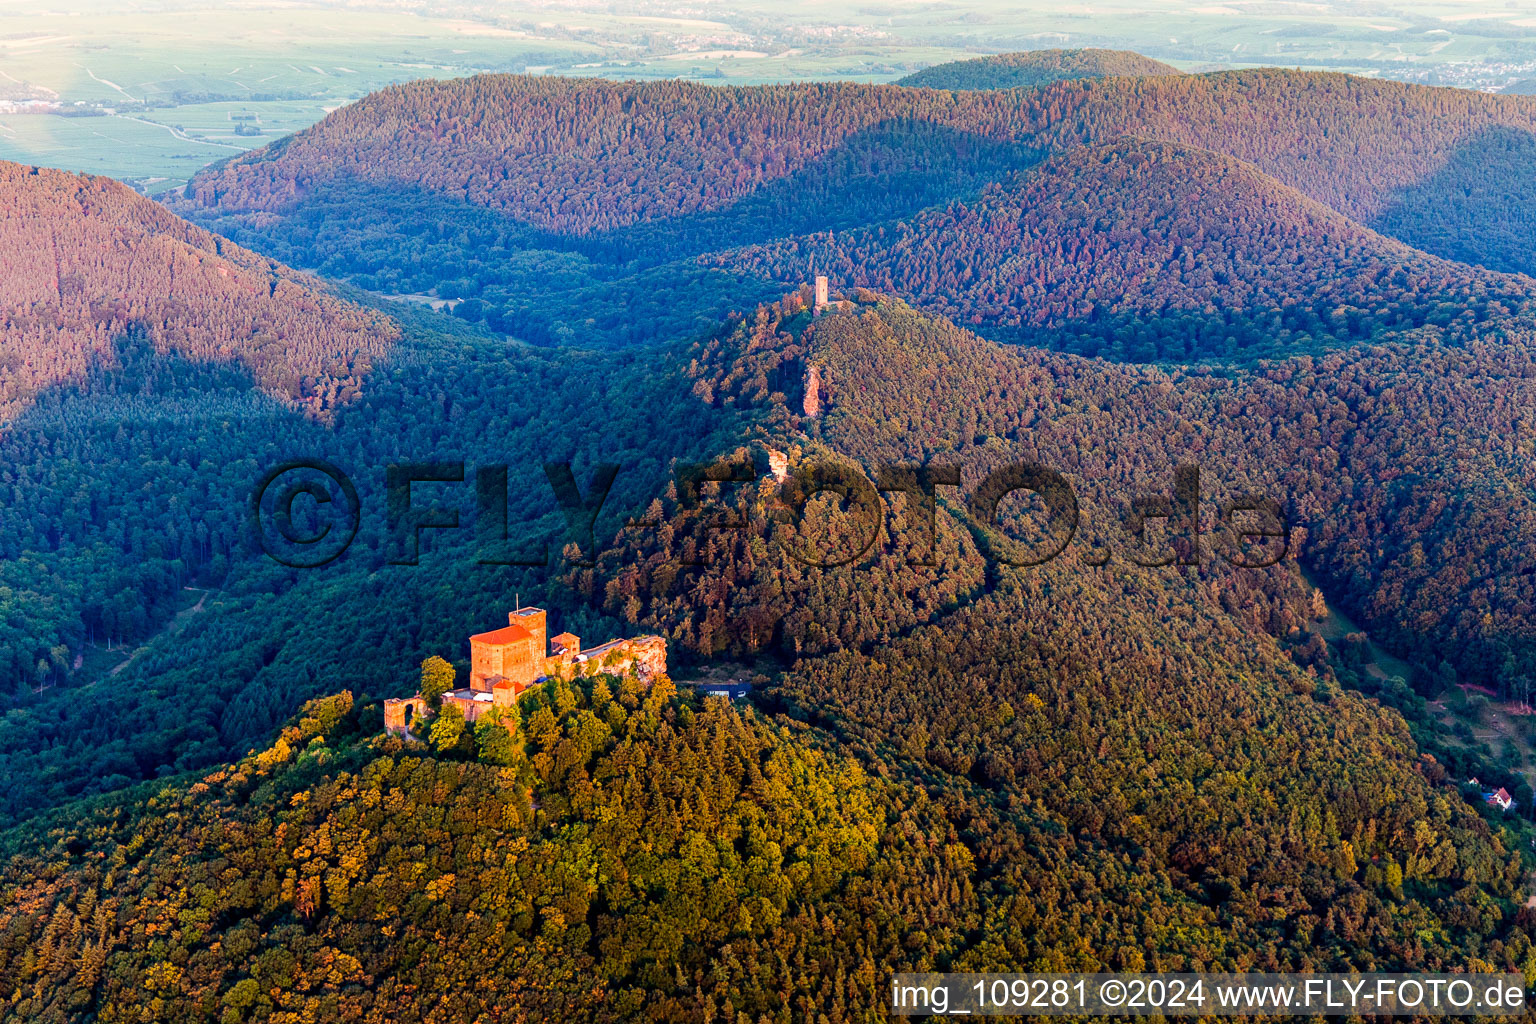 Castle of Trifels and the former fortresses Anebos and Scharfenberg(Muenz) in morning light above the hills of the Pfaelzerwald in Annweiler am Trifels in the state Rhineland-Palatinate, Germany